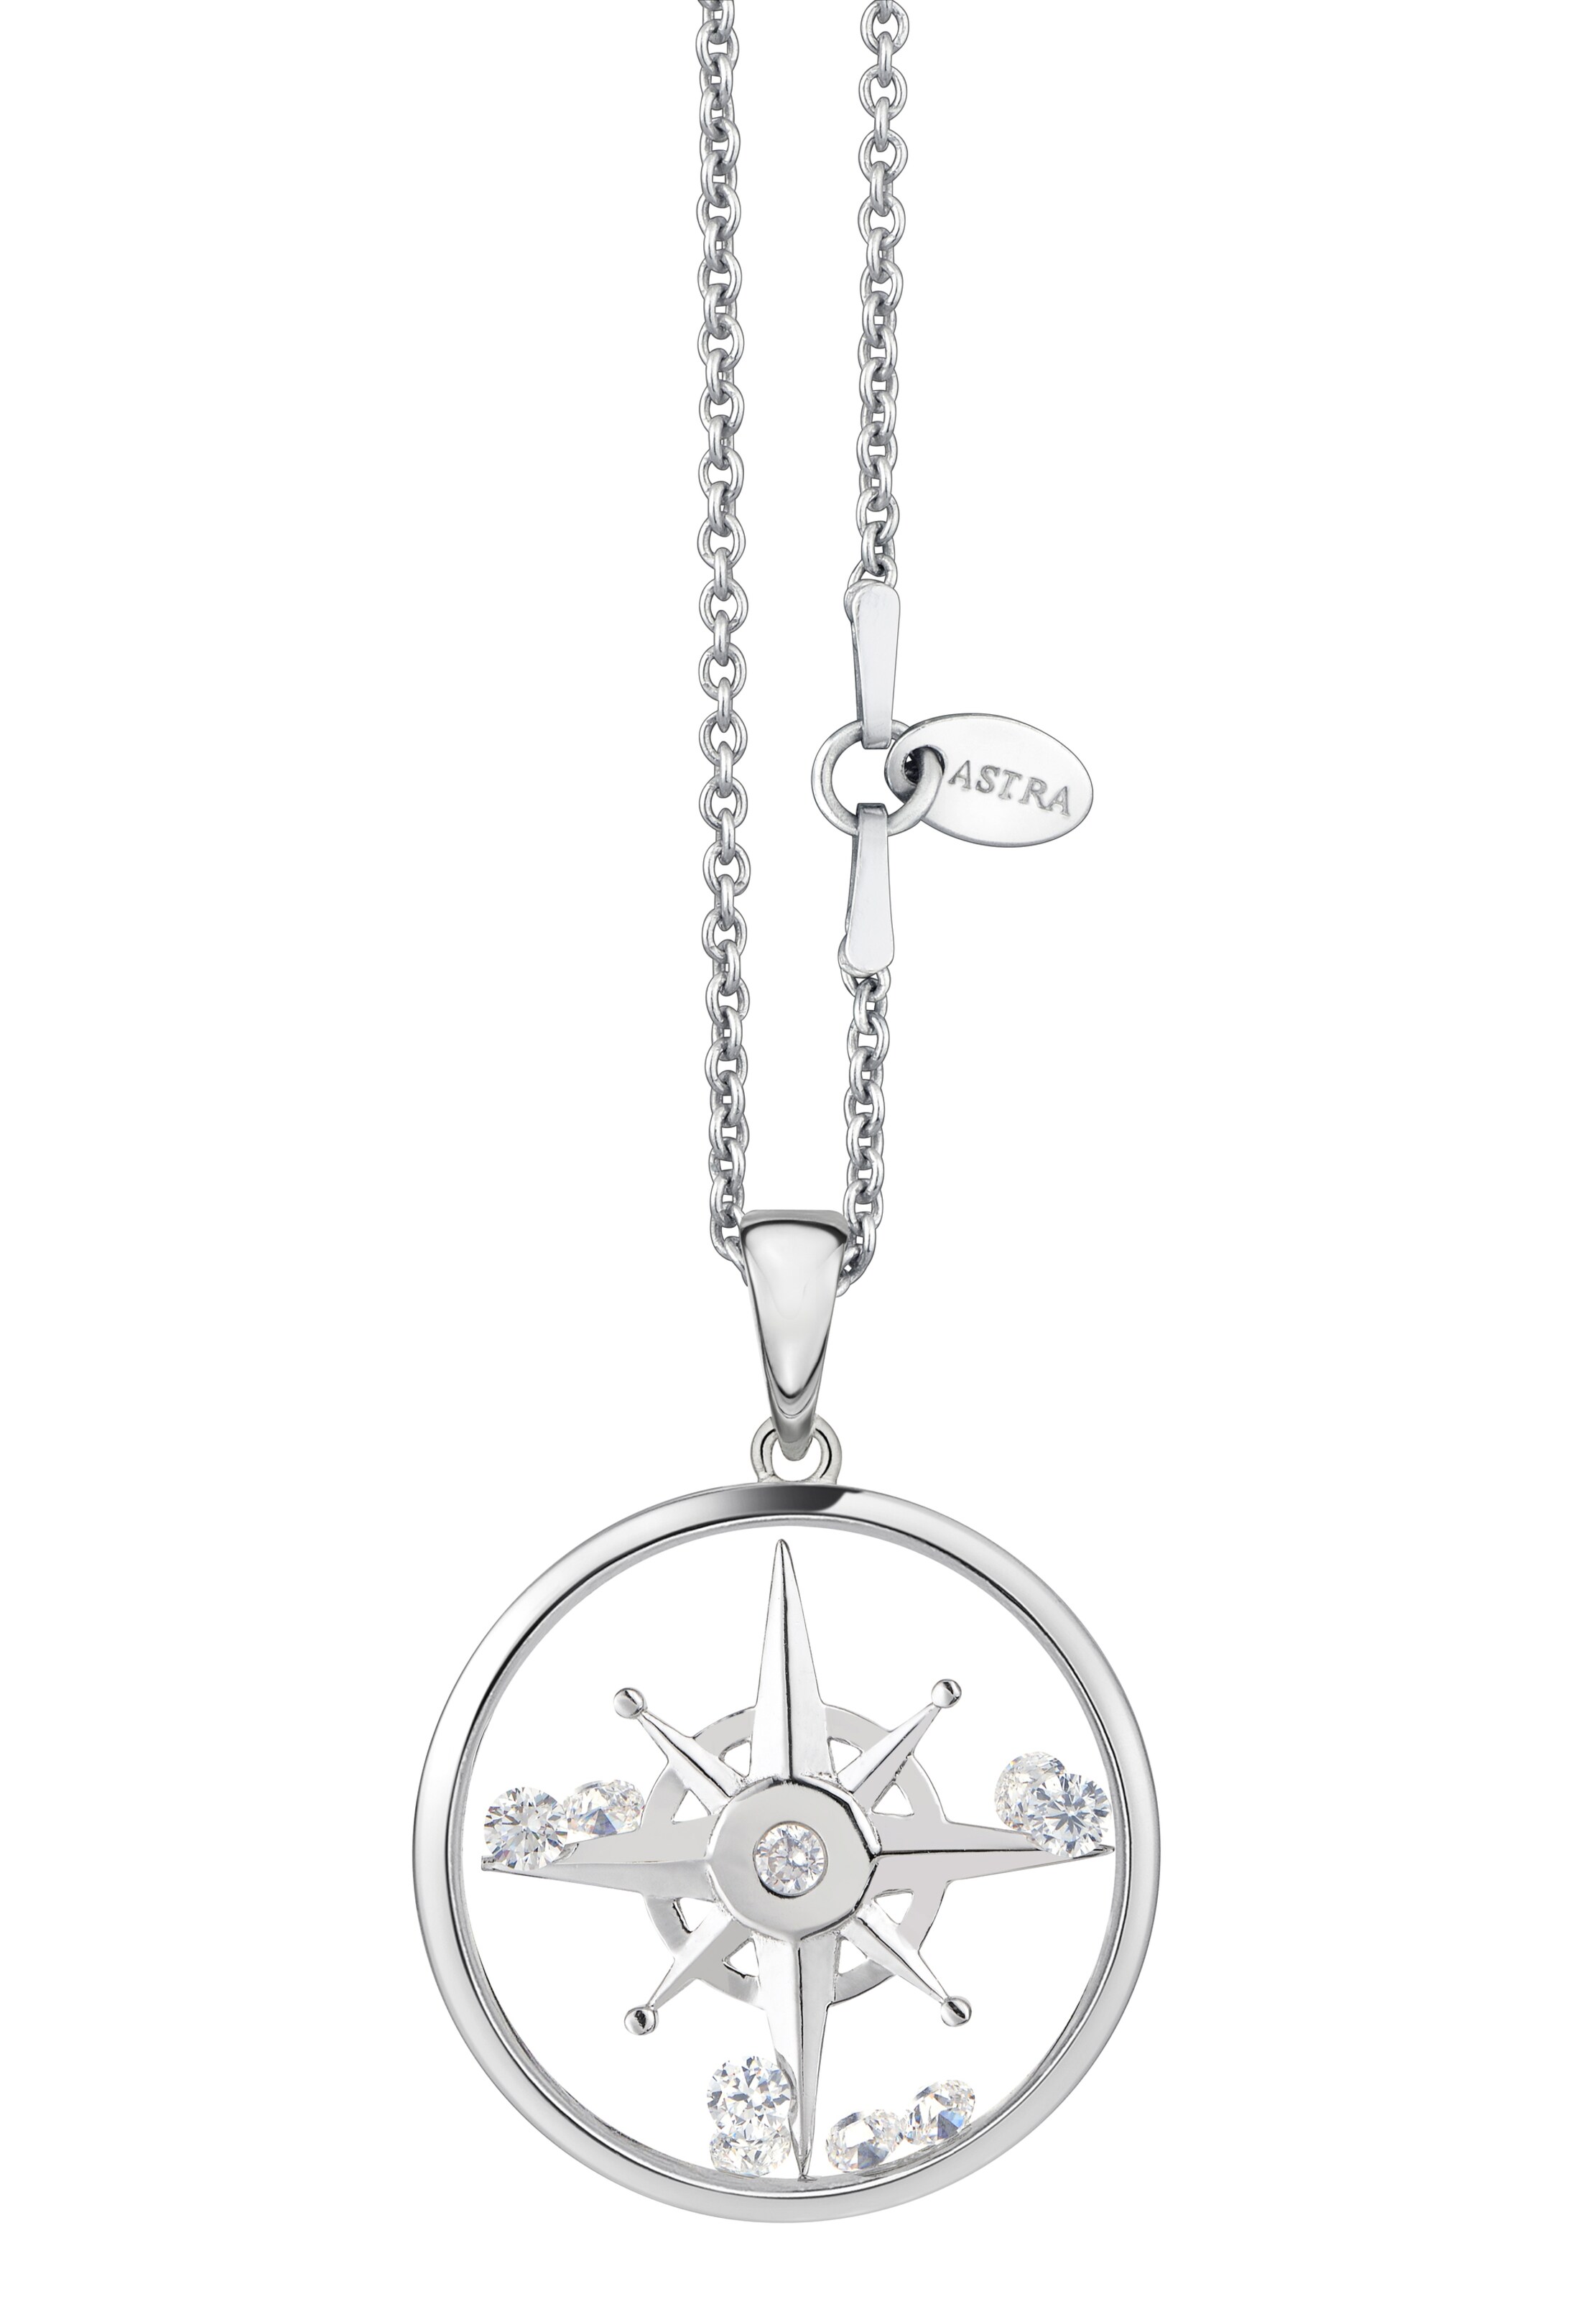 Astra Kette COMPASS in Silber 